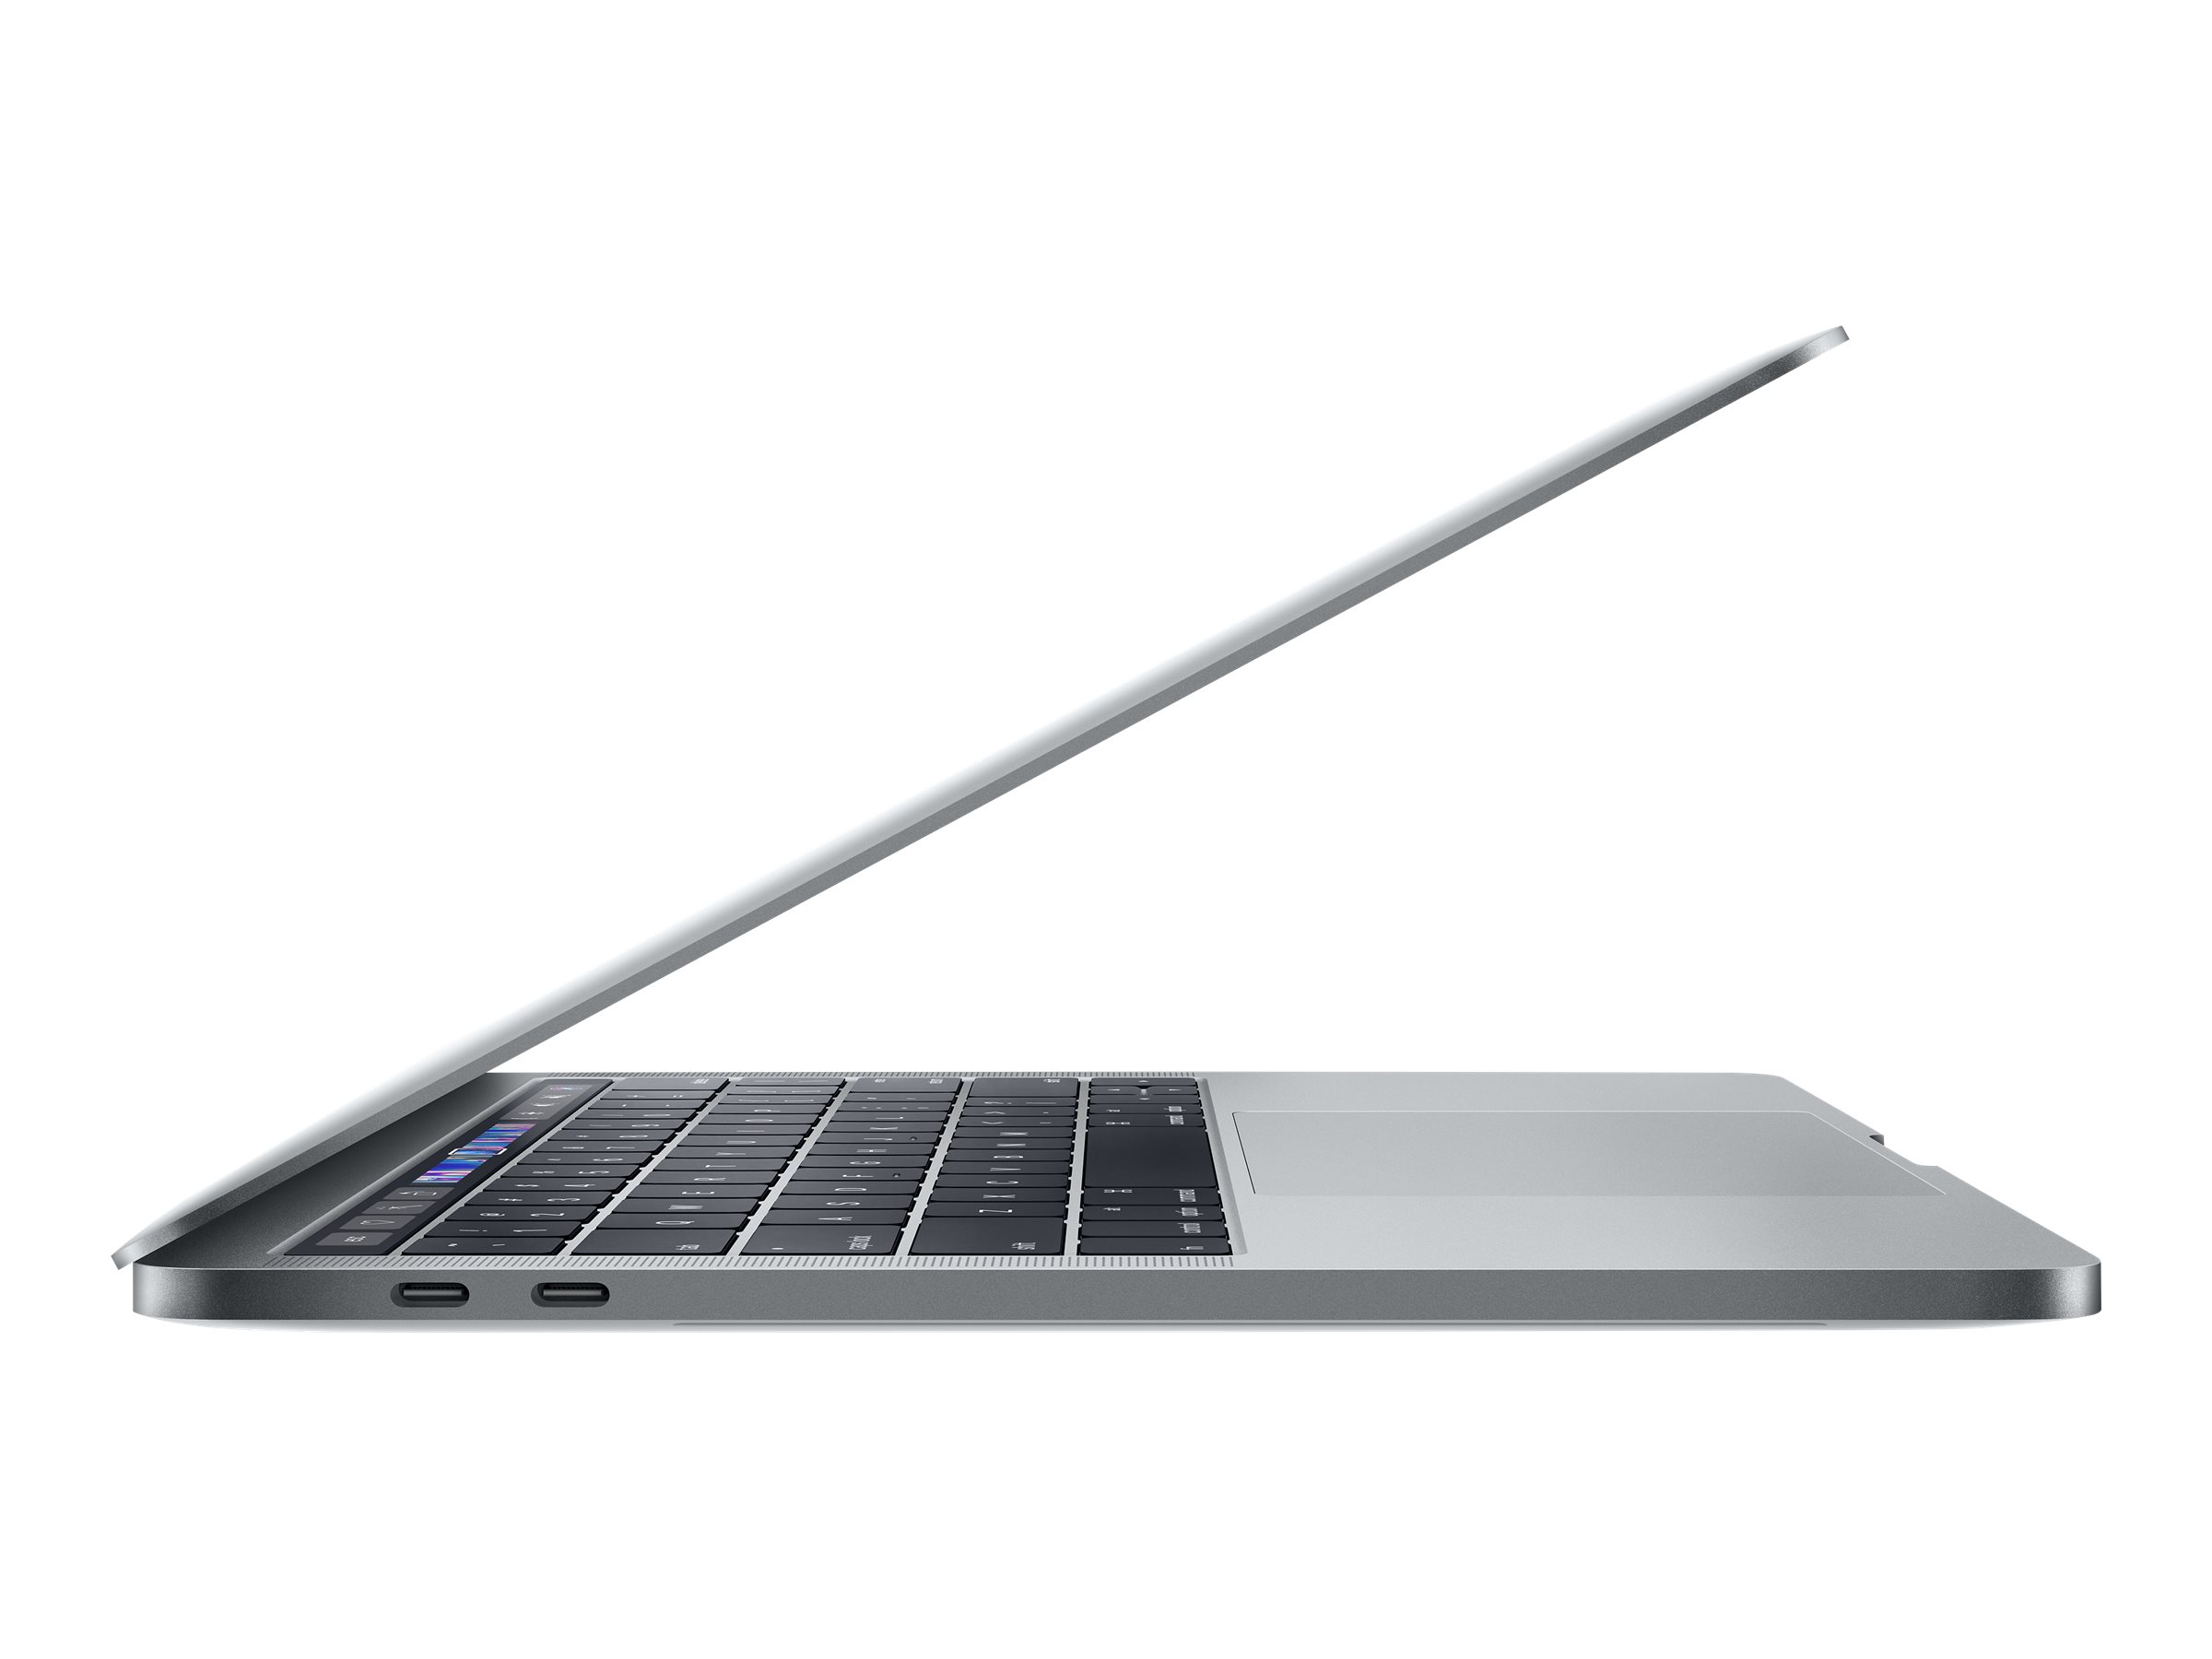 Apple MacBook Pro with Touch Bar | www.shi.ca